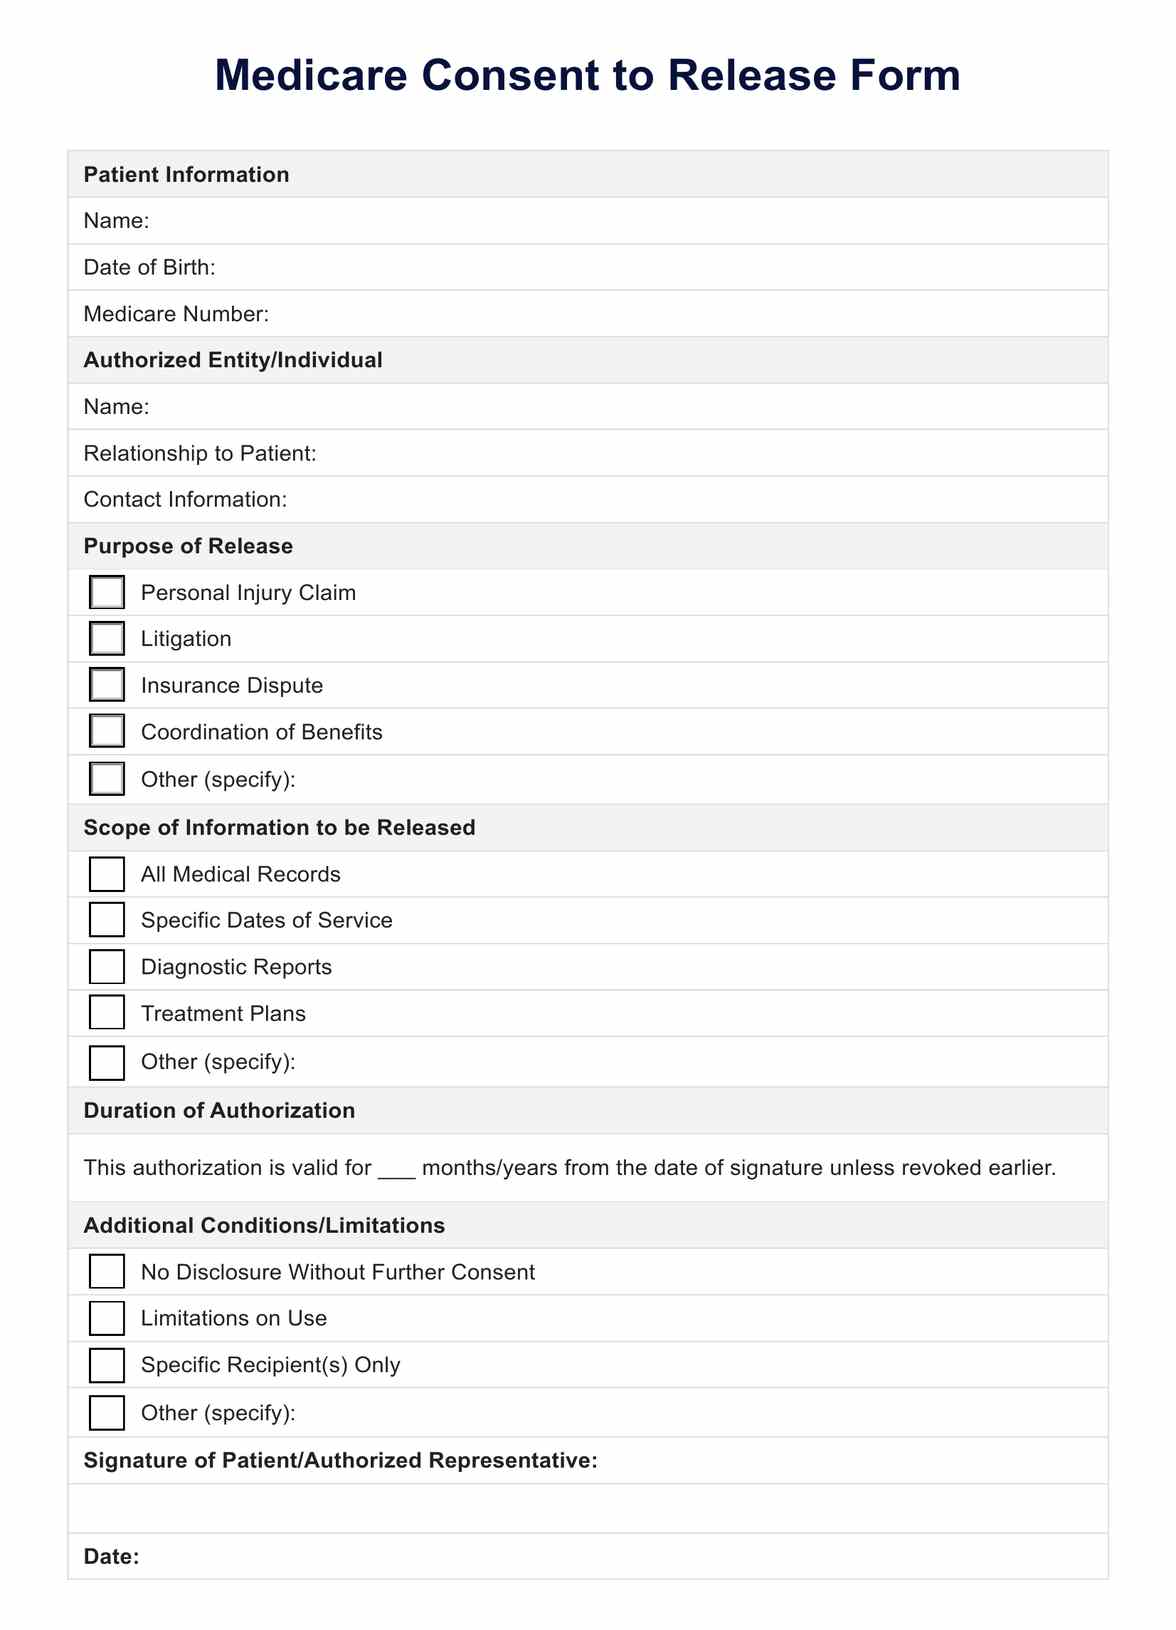 Medicare Consent to Release Form PDF Example